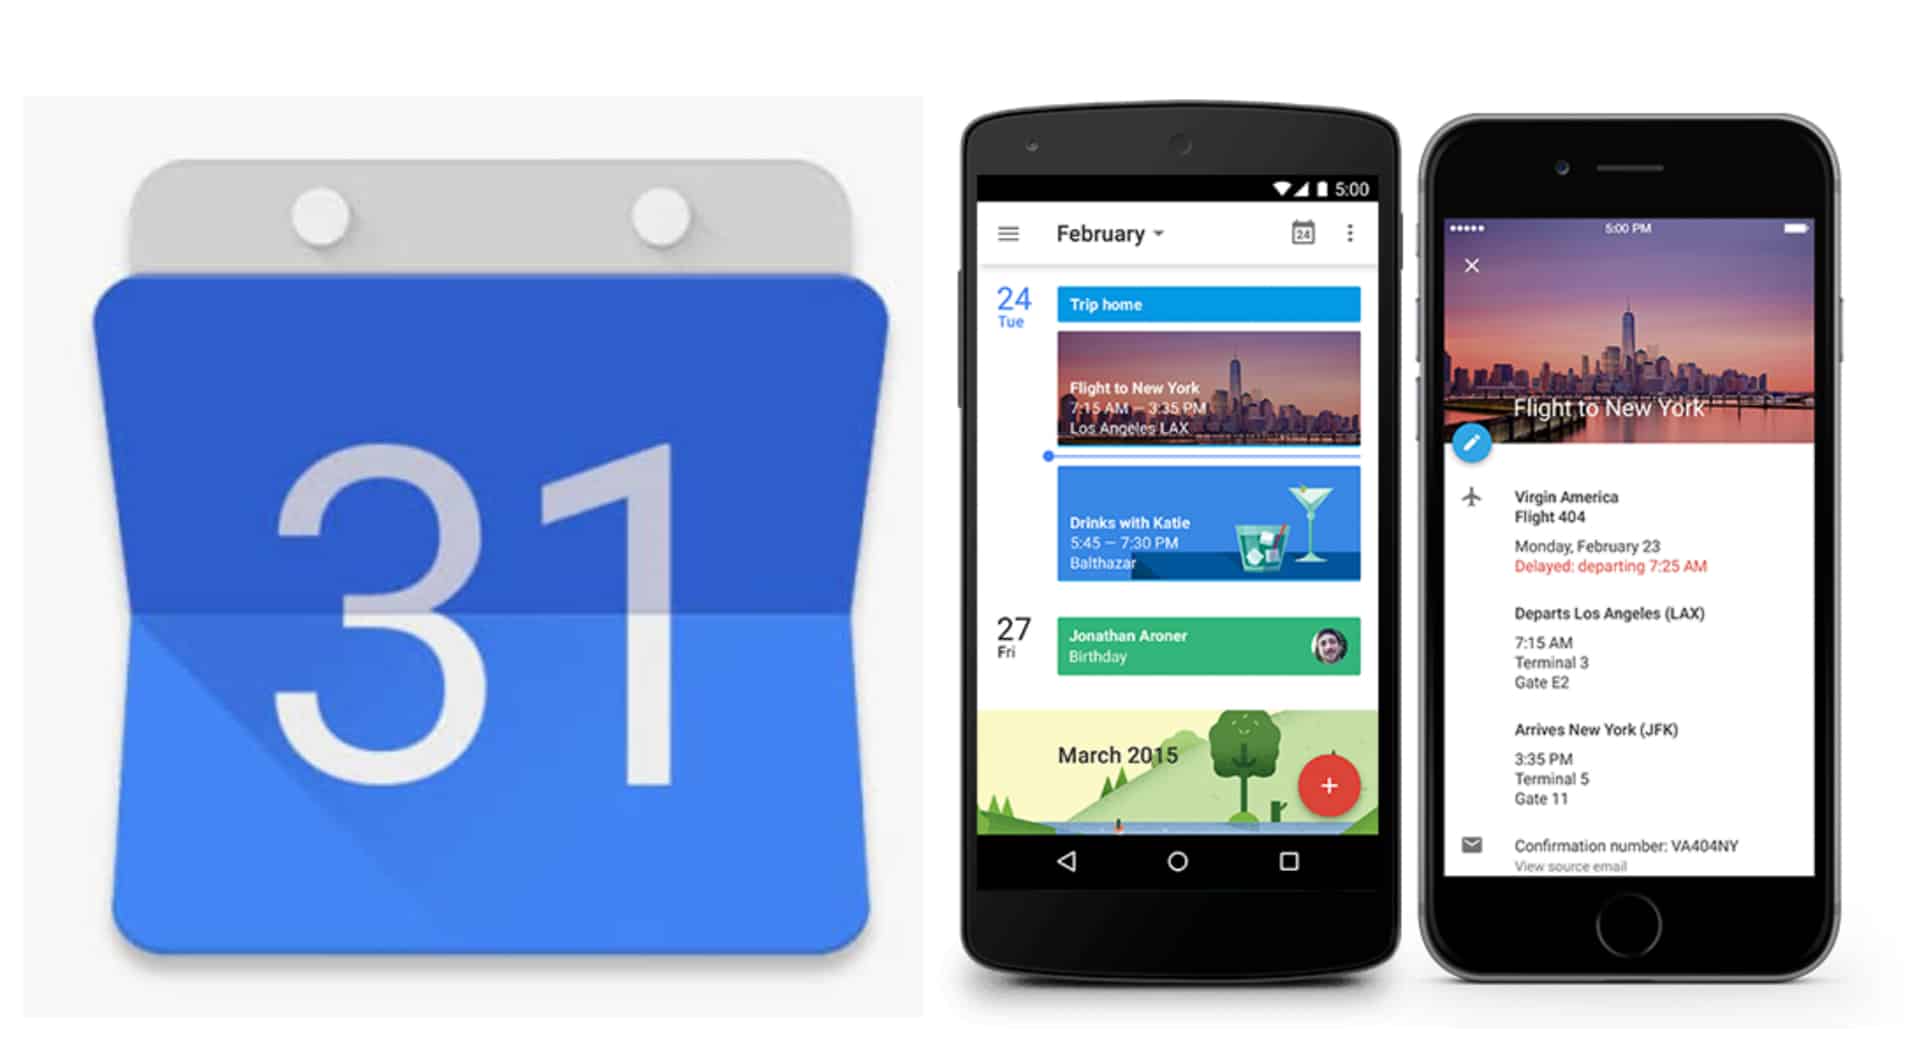 Android 11 Work Profile Now Allows Users View Personal and Work Calendars Together